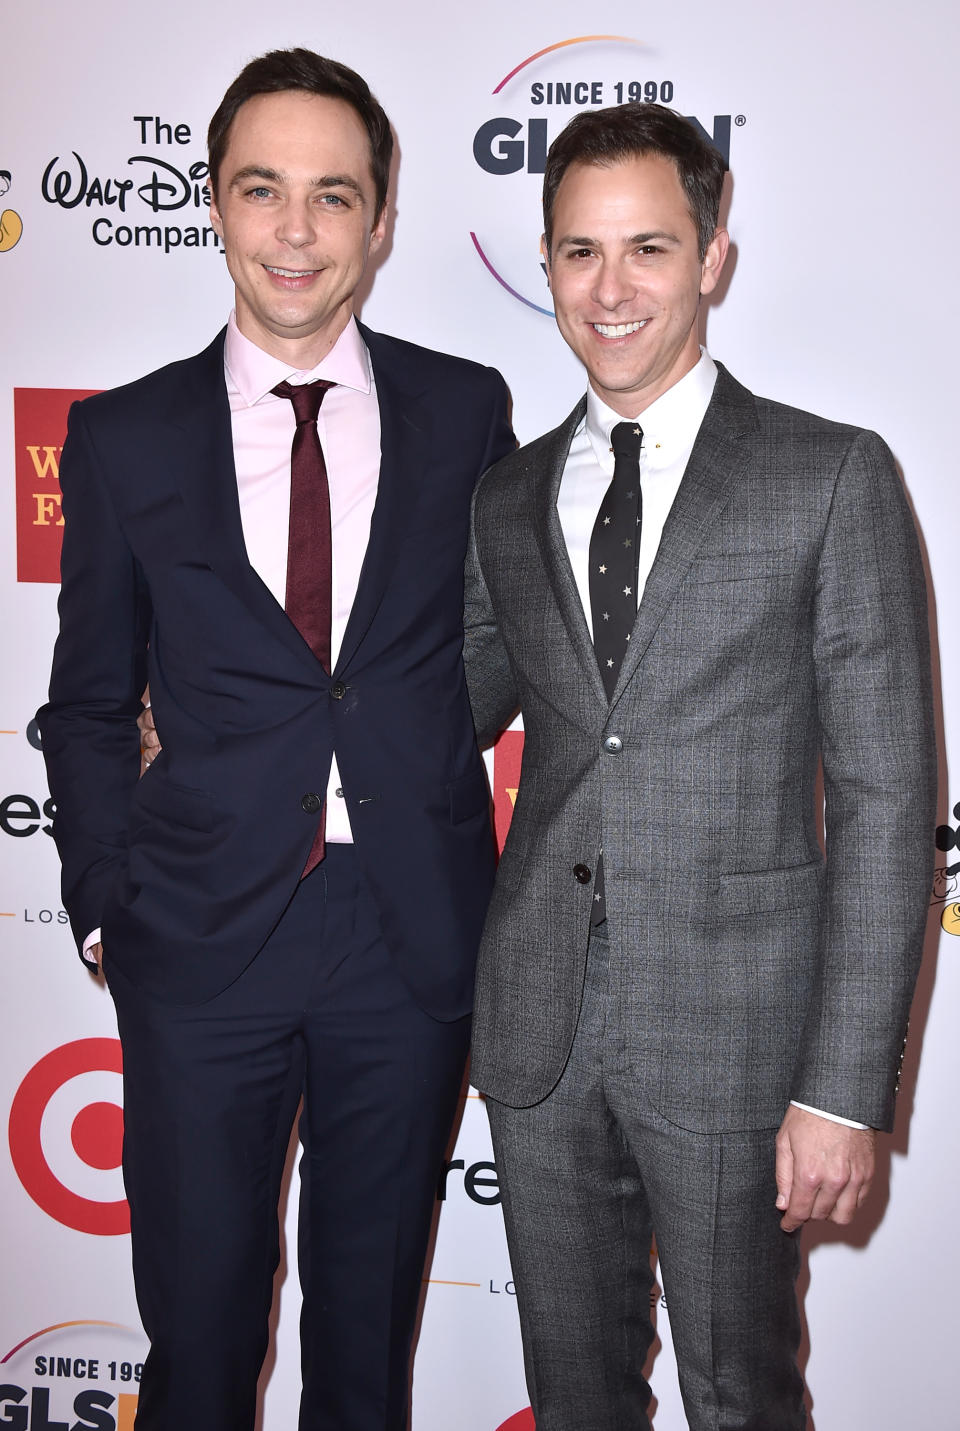 Jim Parsons and Todd Spiewak arrive at the 2015 GLSEN Respect Awards on Friday, October 23, 2015 in Los Angeles. (Photo by Jordan Strauss/Invision/AP)